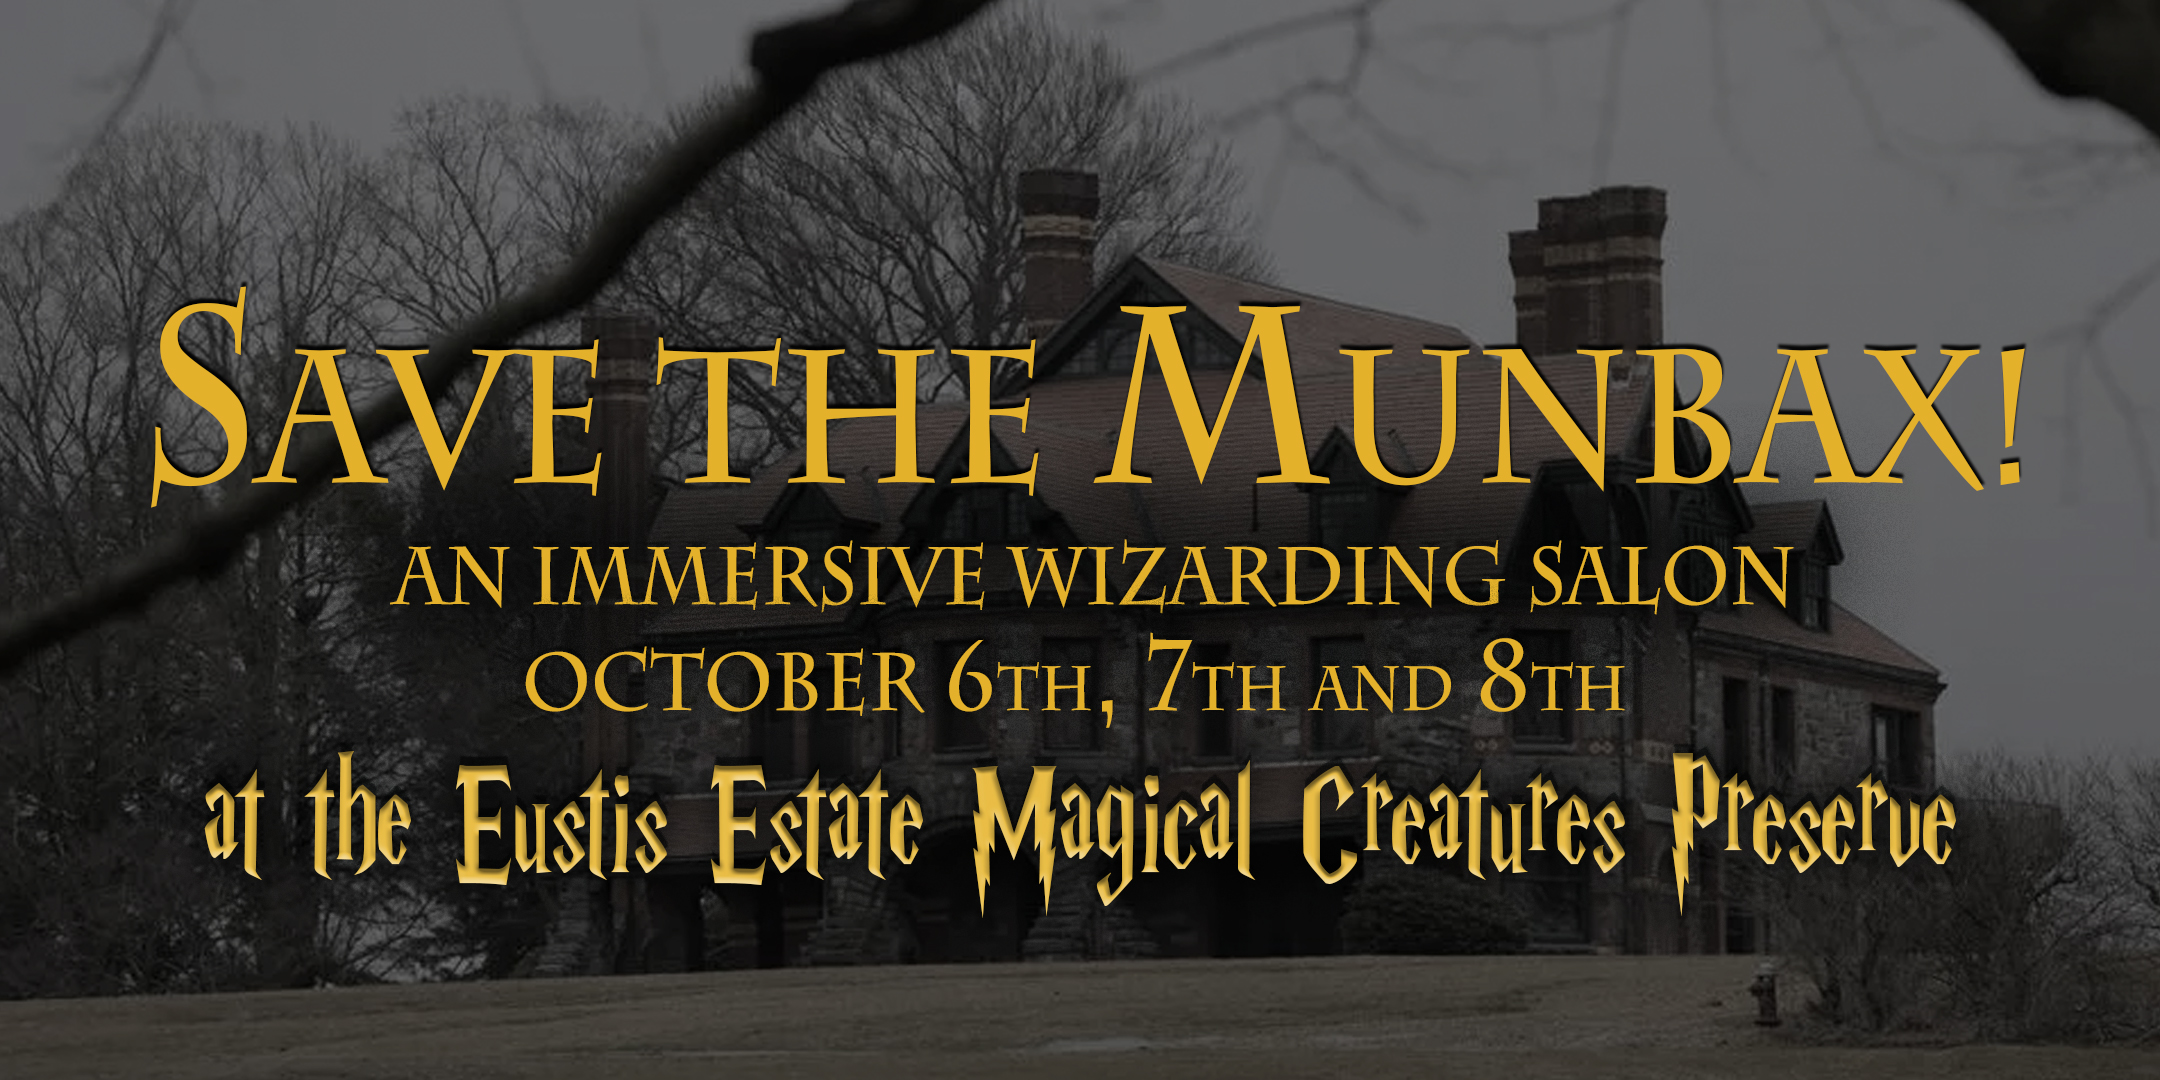 Save the Munbax! The Society for the Protection of Mythical Creatures, Eustis Estate Museum